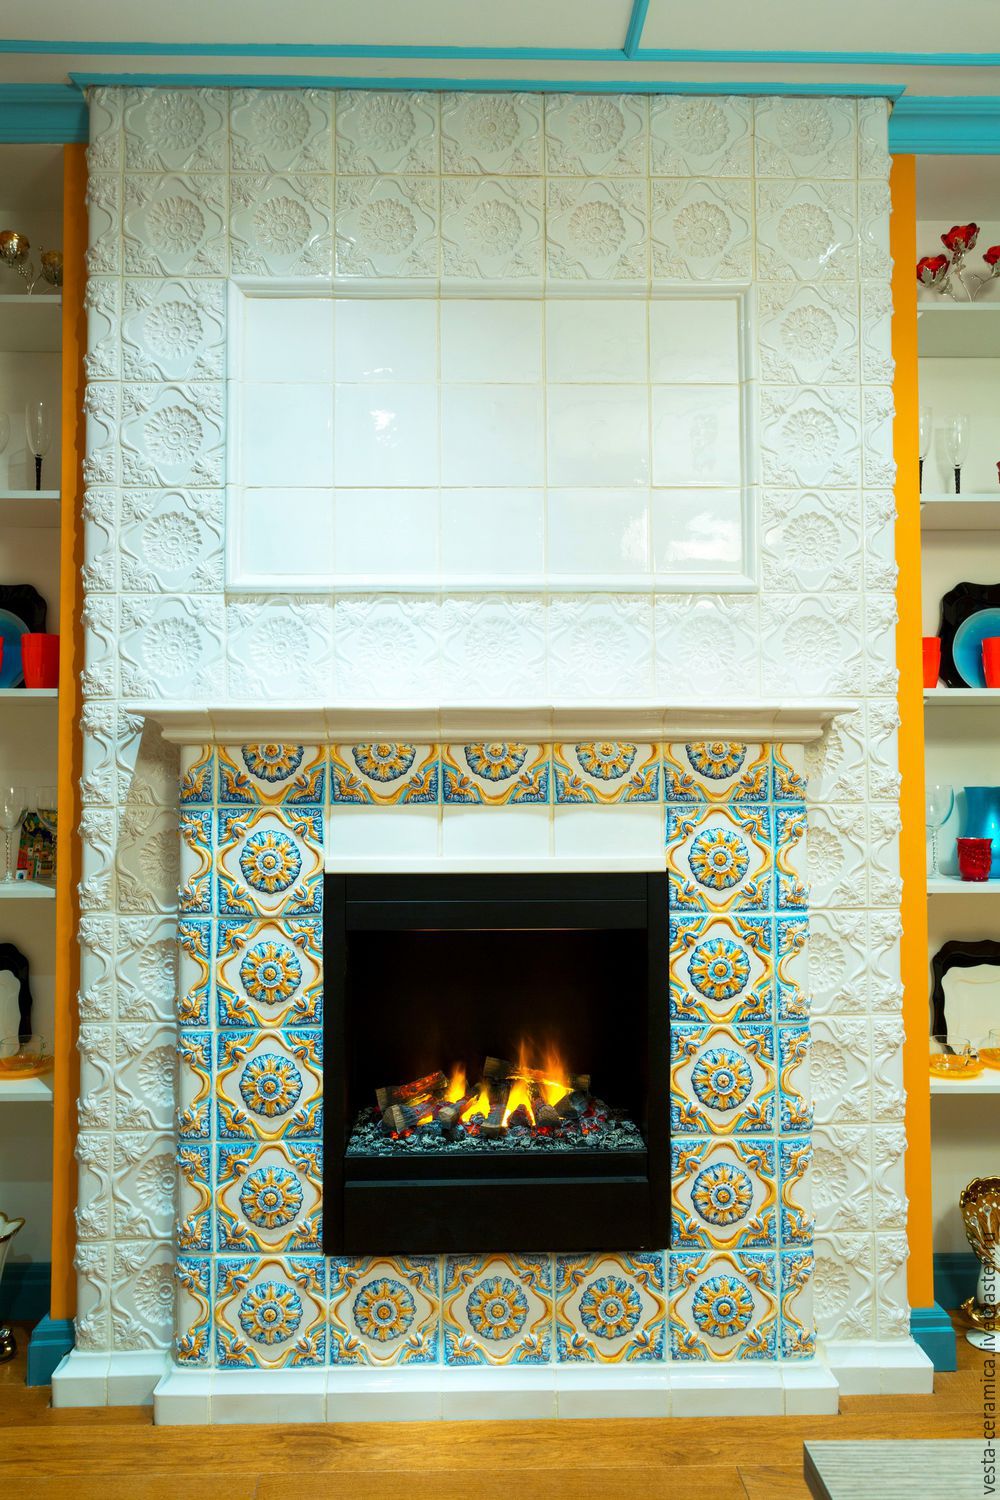 Fireplace Items Fresh Tiled Fireplace